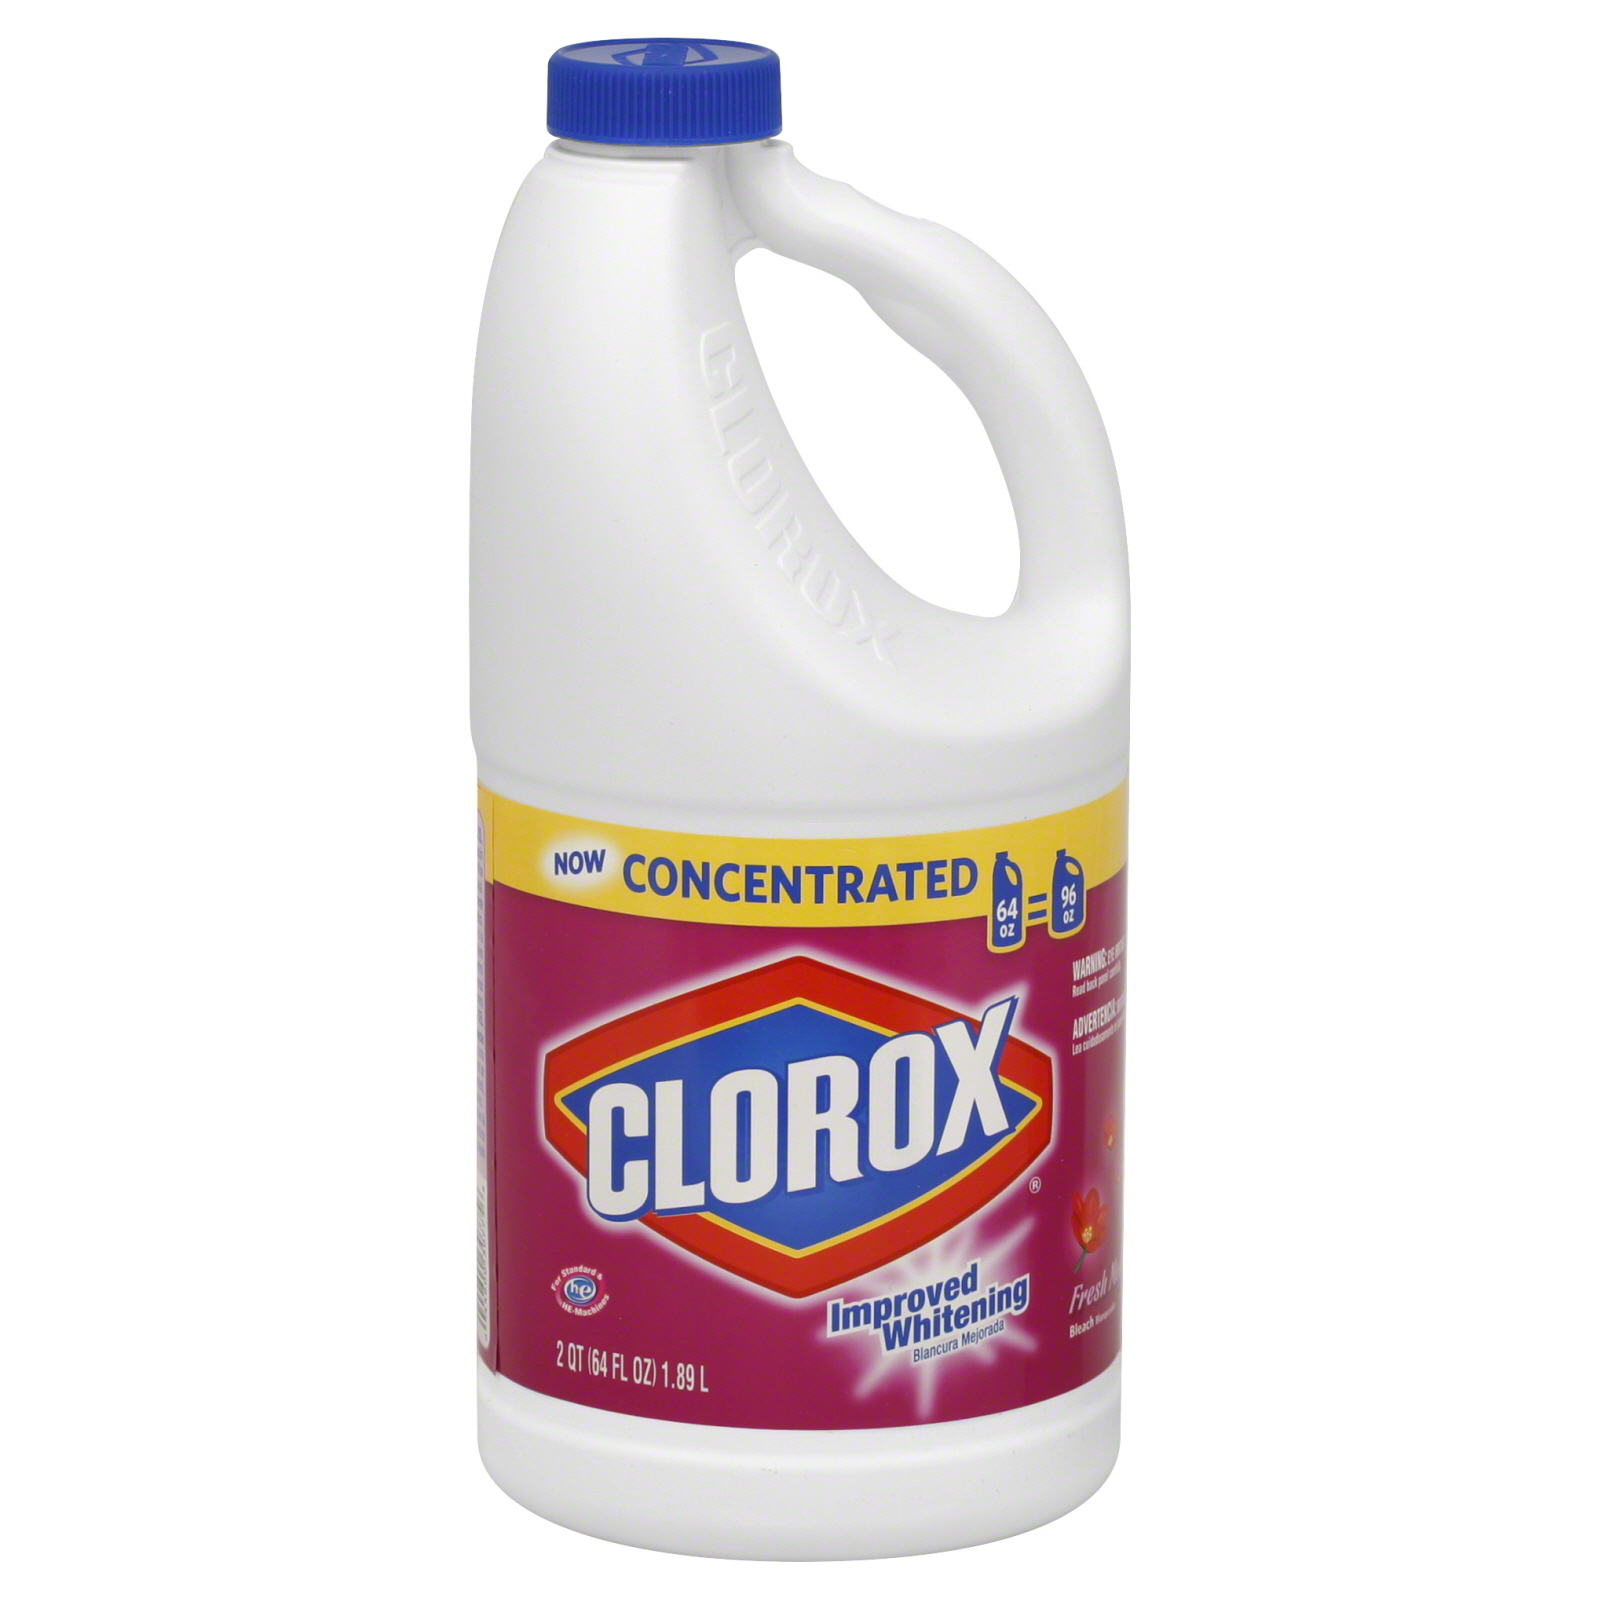 Clorox Bleach, Concentrated, 2 qt (64 fl oz) 1.89 lt   Food & Grocery   Laundry Care   Bleach